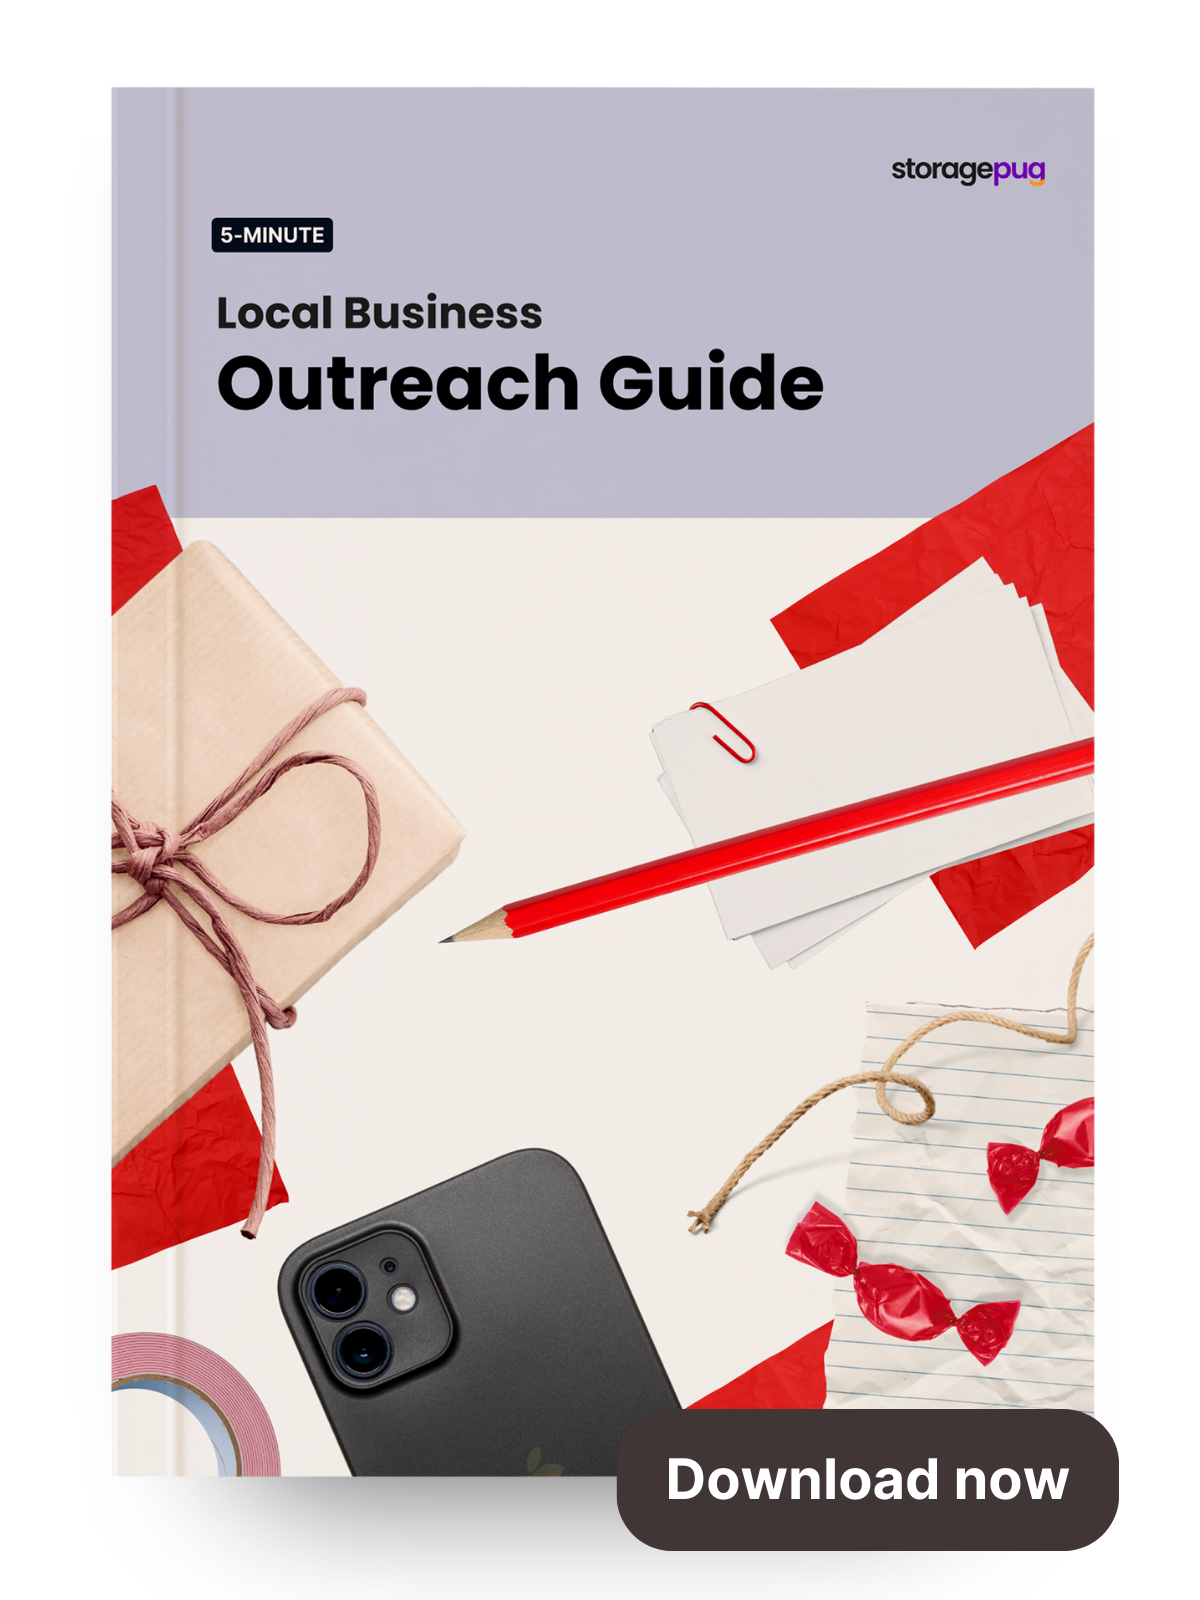 5-Minute Local Business Outreach Guide5